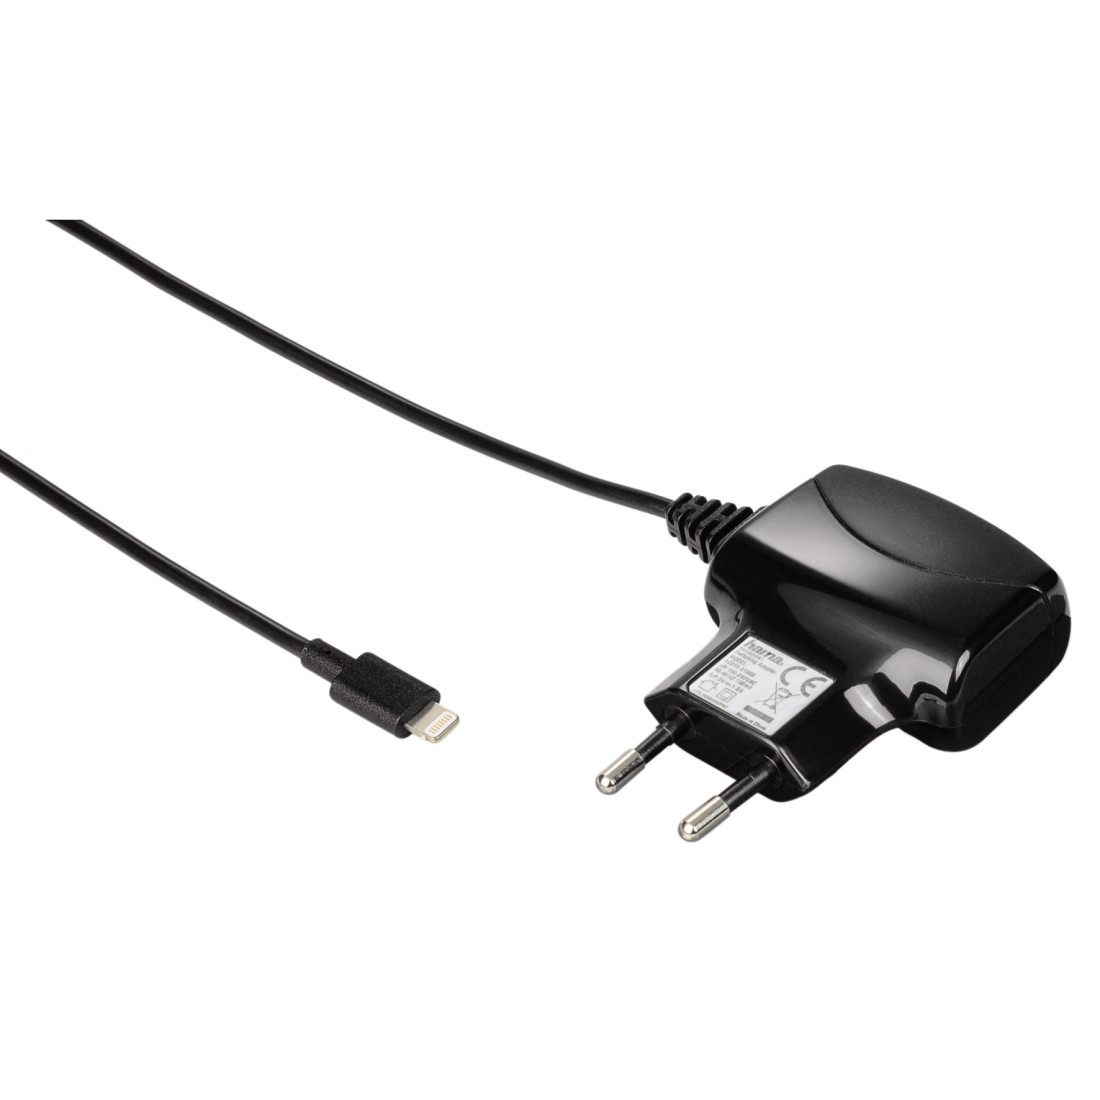 00080835 Hama 230V Travel Charger for Apple iPod nano 7G/touch 5G/iPhone 5,  MFI | hama.com